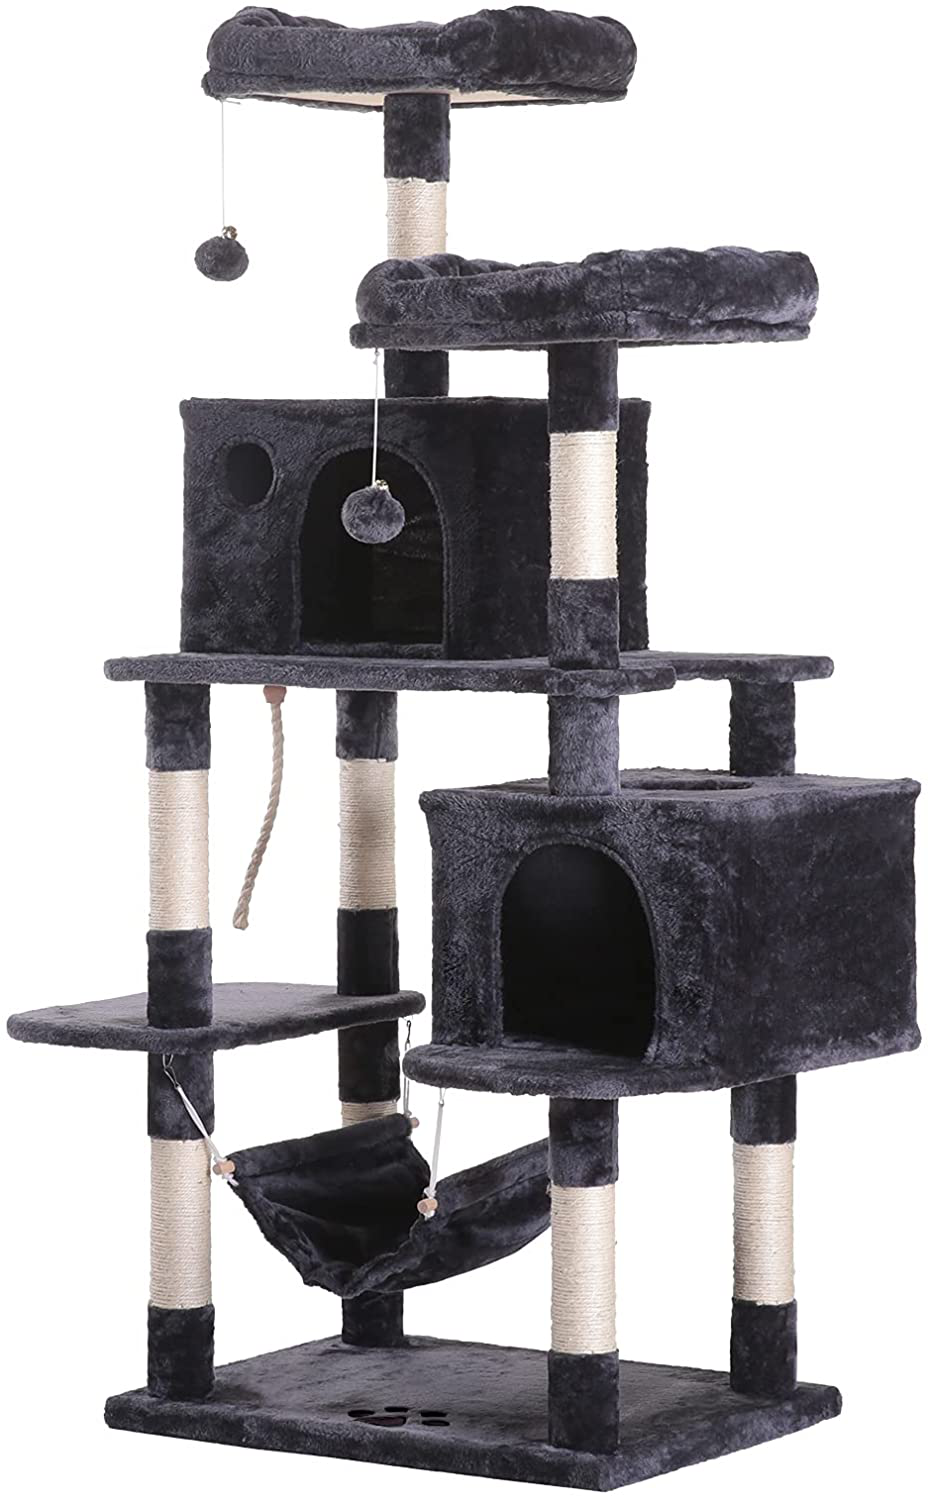 Hey-Bro Extra Large Multi-Level Cat Tree Condo Furniture with Sisal-Covered Scratching Posts, 2 Bigger Plush Condos, Perch Hammock for Kittens, Cats and Pets Animals & Pet Supplies > Pet Supplies > Cat Supplies > Cat Furniture Hey-brother Smoky Gray  